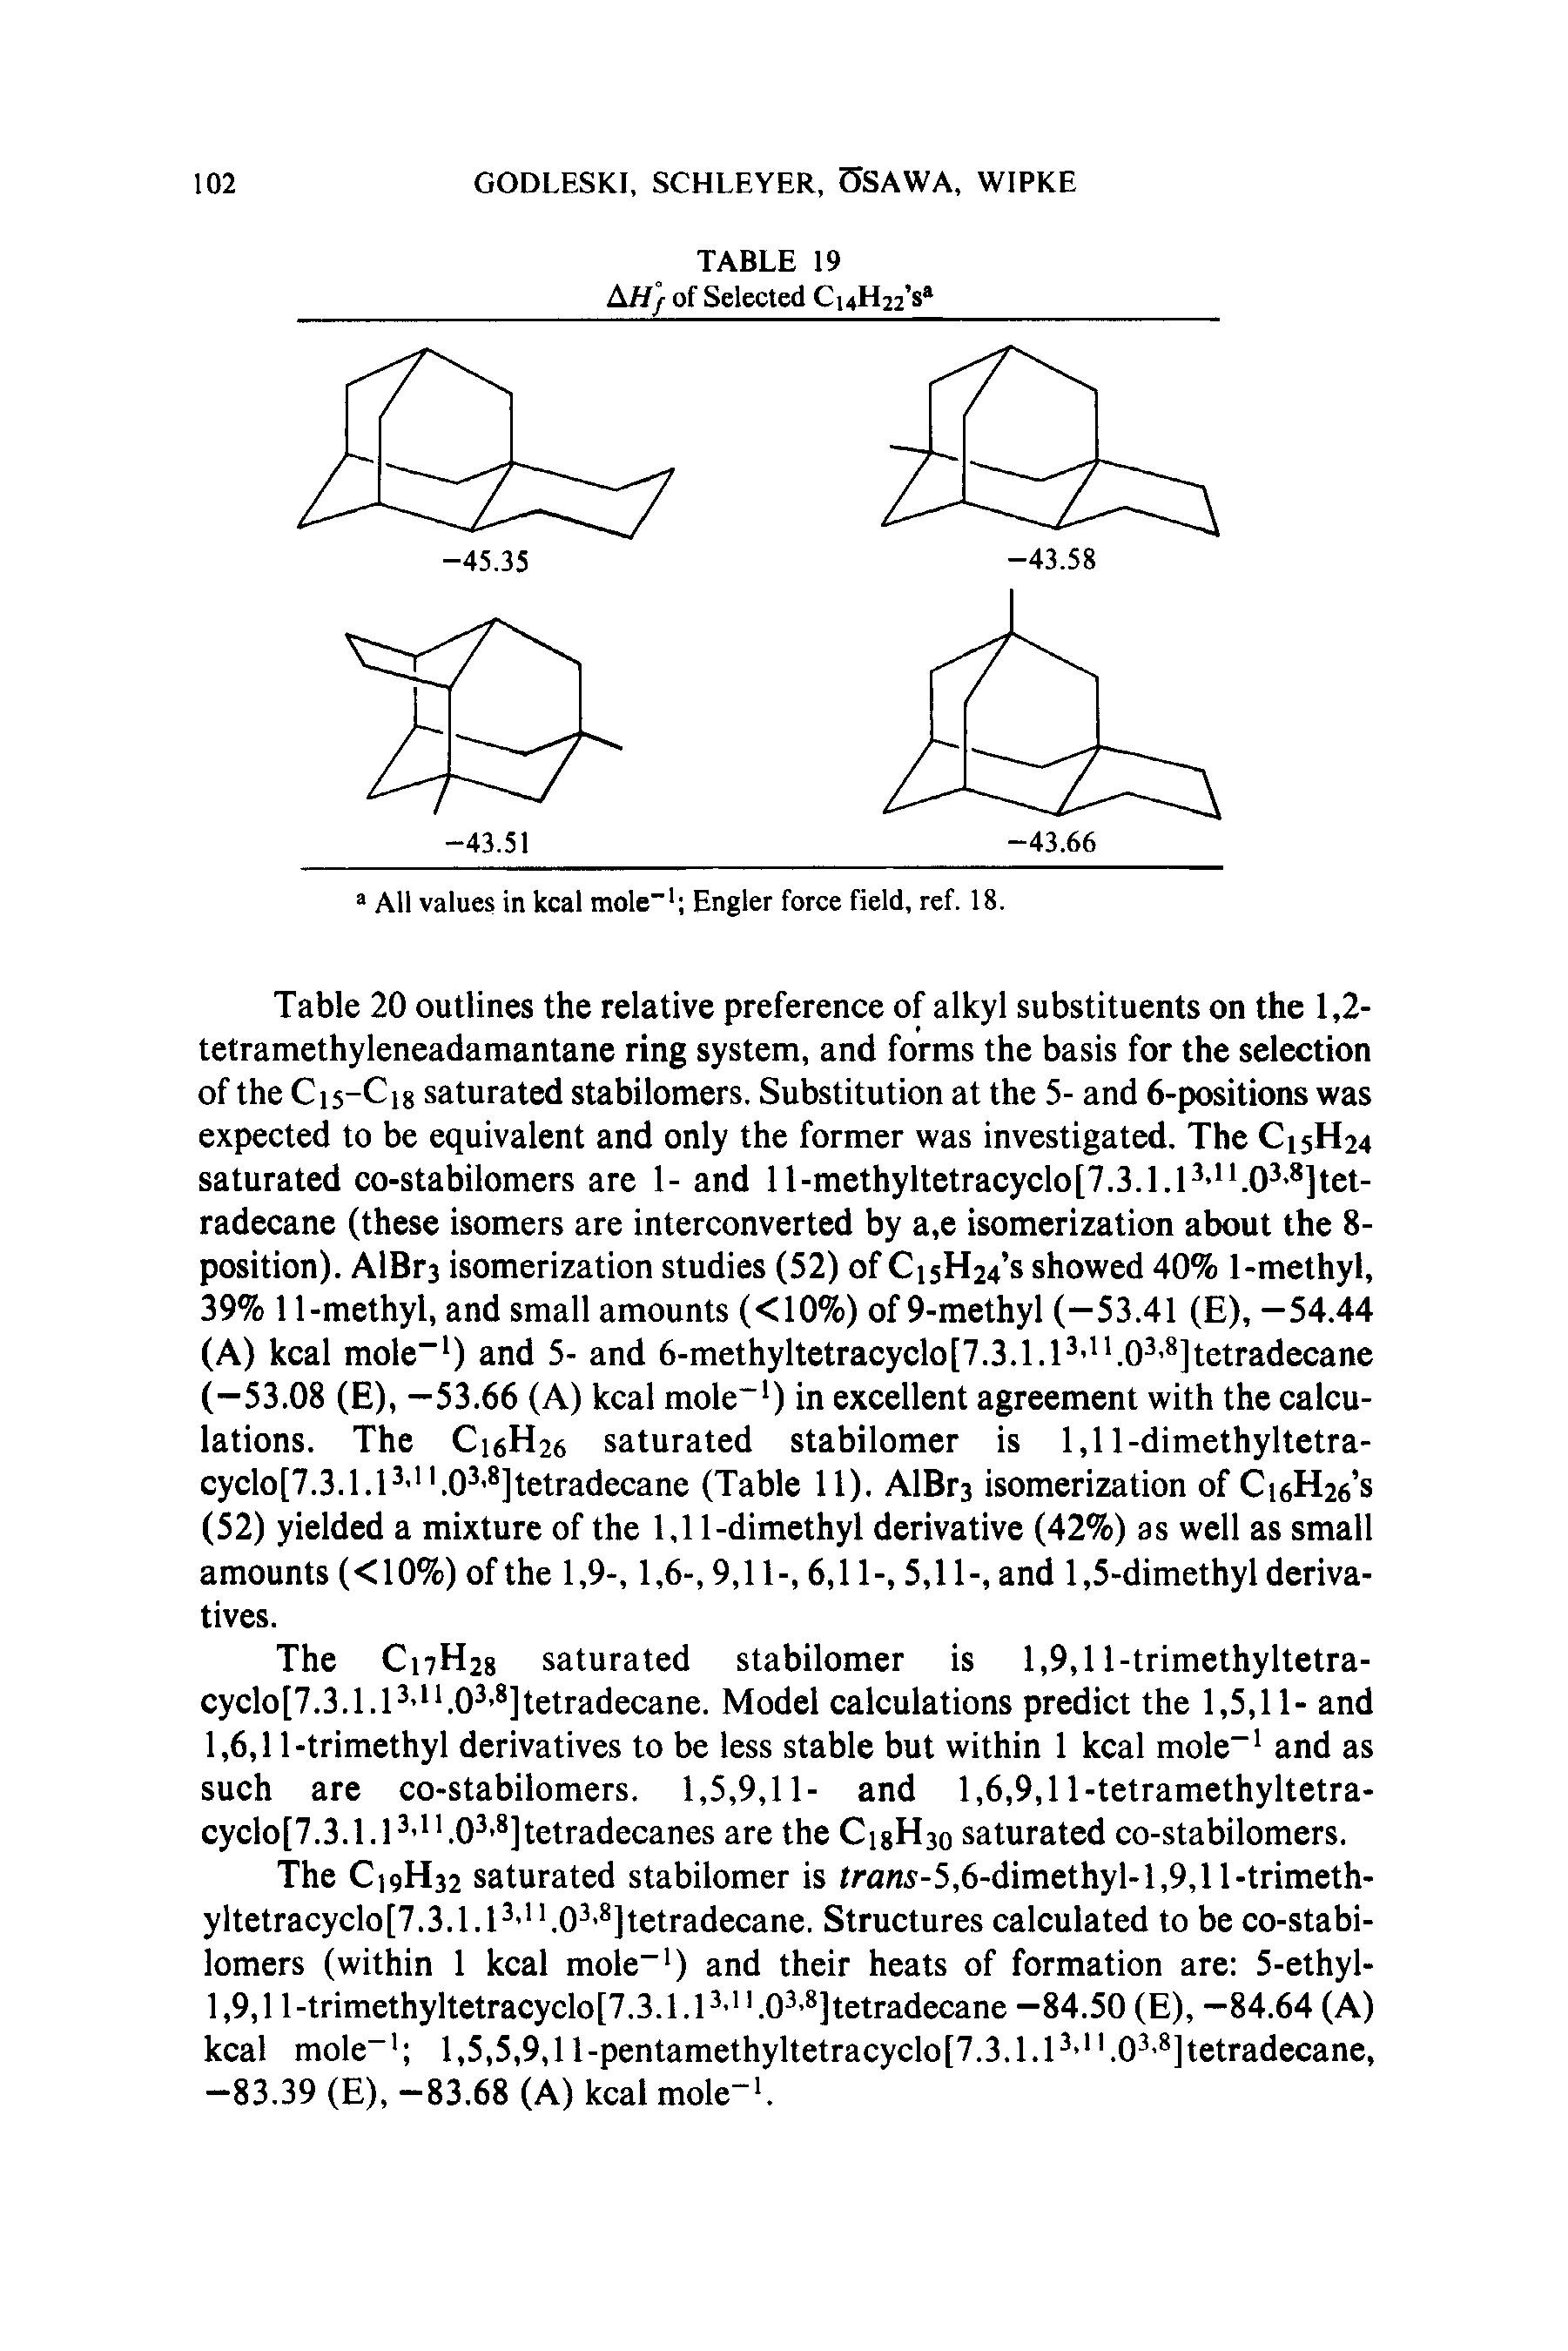 Table 20 outlines the relative preference of alkyl substituents on the 1,2-tetramethyleneadamantane ring system, and forms the basis for the selection of the C15-C18 saturated stabilomers. Substitution at the 5- and 6-positions was expected to be equivalent and only the former was investigated. The C15H24 saturated co-stabilomers are 1- and ll-methyltetracyclo[7.3.1.P- . 0 ]tct-radecane (these isomers are interconverted by a,e isomerization about the 8-position). AlBrs isomerization studies (52) of CisH24 s showed 40% 1-methyl, 39% 11-methyl, and small amounts (<10%) of 9-methyl (-53.41 (E), -54.44 (A) kcal mole ) and 5- and 6-methyltetracyclo[7.3.1.1 i.o3.8]tetradecane (-53.08 (E), —53.66 (A) kcal mole ) in excellent agreement with the calculations. The C16H26 saturated stabilomer is 1,11-dimethyltetra-cyclo[7.3.1.P ".0 ]tetradecane (Table 11). AlBrs isomerization of Ci6H26 s (52) yielded a mixture of the 1,11-dimethyl derivative (42%) as well as small amounts (<10%) of the 1,9-, 1,6-, 9,11-, 6,11-, 5,11-, and 1,5-dimethyl derivatives.